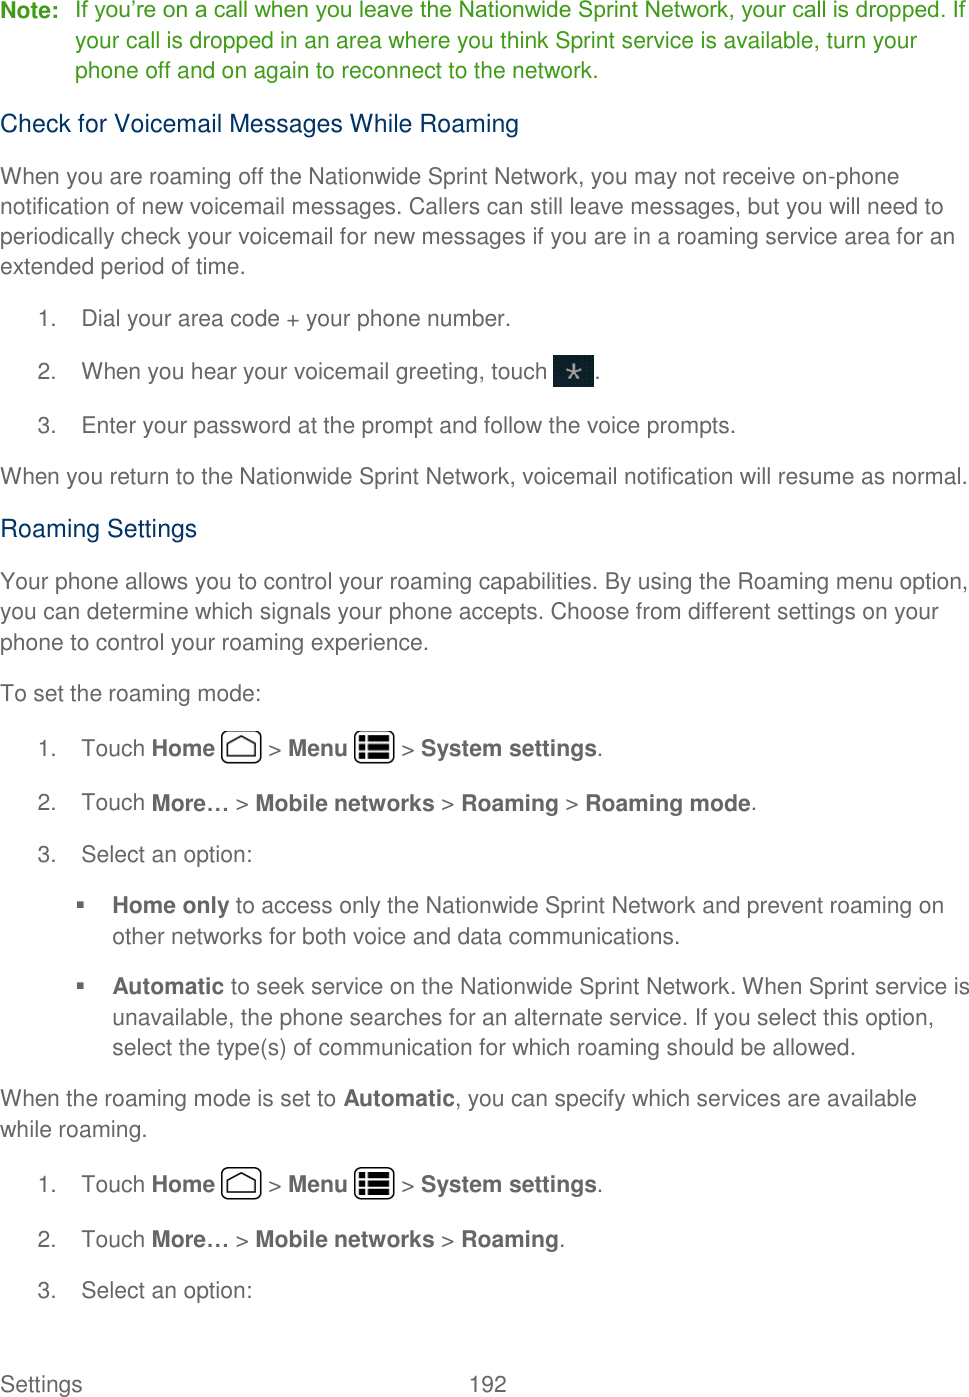 Settings    192 Note: If you’re on a call when you leave the Nationwide Sprint Network, your call is dropped. If your call is dropped in an area where you think Sprint service is available, turn your phone off and on again to reconnect to the network. Check for Voicemail Messages While Roaming When you are roaming off the Nationwide Sprint Network, you may not receive on-phone notification of new voicemail messages. Callers can still leave messages, but you will need to periodically check your voicemail for new messages if you are in a roaming service area for an extended period of time. 1.  Dial your area code + your phone number. 2.  When you hear your voicemail greeting, touch  . 3.  Enter your password at the prompt and follow the voice prompts. When you return to the Nationwide Sprint Network, voicemail notification will resume as normal. Roaming Settings Your phone allows you to control your roaming capabilities. By using the Roaming menu option, you can determine which signals your phone accepts. Choose from different settings on your phone to control your roaming experience. To set the roaming mode: 1.  Touch Home   &gt; Menu   &gt; System settings. 2.  Touch More… &gt; Mobile networks &gt; Roaming &gt; Roaming mode. 3.  Select an option:  Home only to access only the Nationwide Sprint Network and prevent roaming on other networks for both voice and data communications.  Automatic to seek service on the Nationwide Sprint Network. When Sprint service is unavailable, the phone searches for an alternate service. If you select this option, select the type(s) of communication for which roaming should be allowed. When the roaming mode is set to Automatic, you can specify which services are available while roaming. 1.  Touch Home   &gt; Menu   &gt; System settings. 2.  Touch More… &gt; Mobile networks &gt; Roaming. 3.  Select an option: 